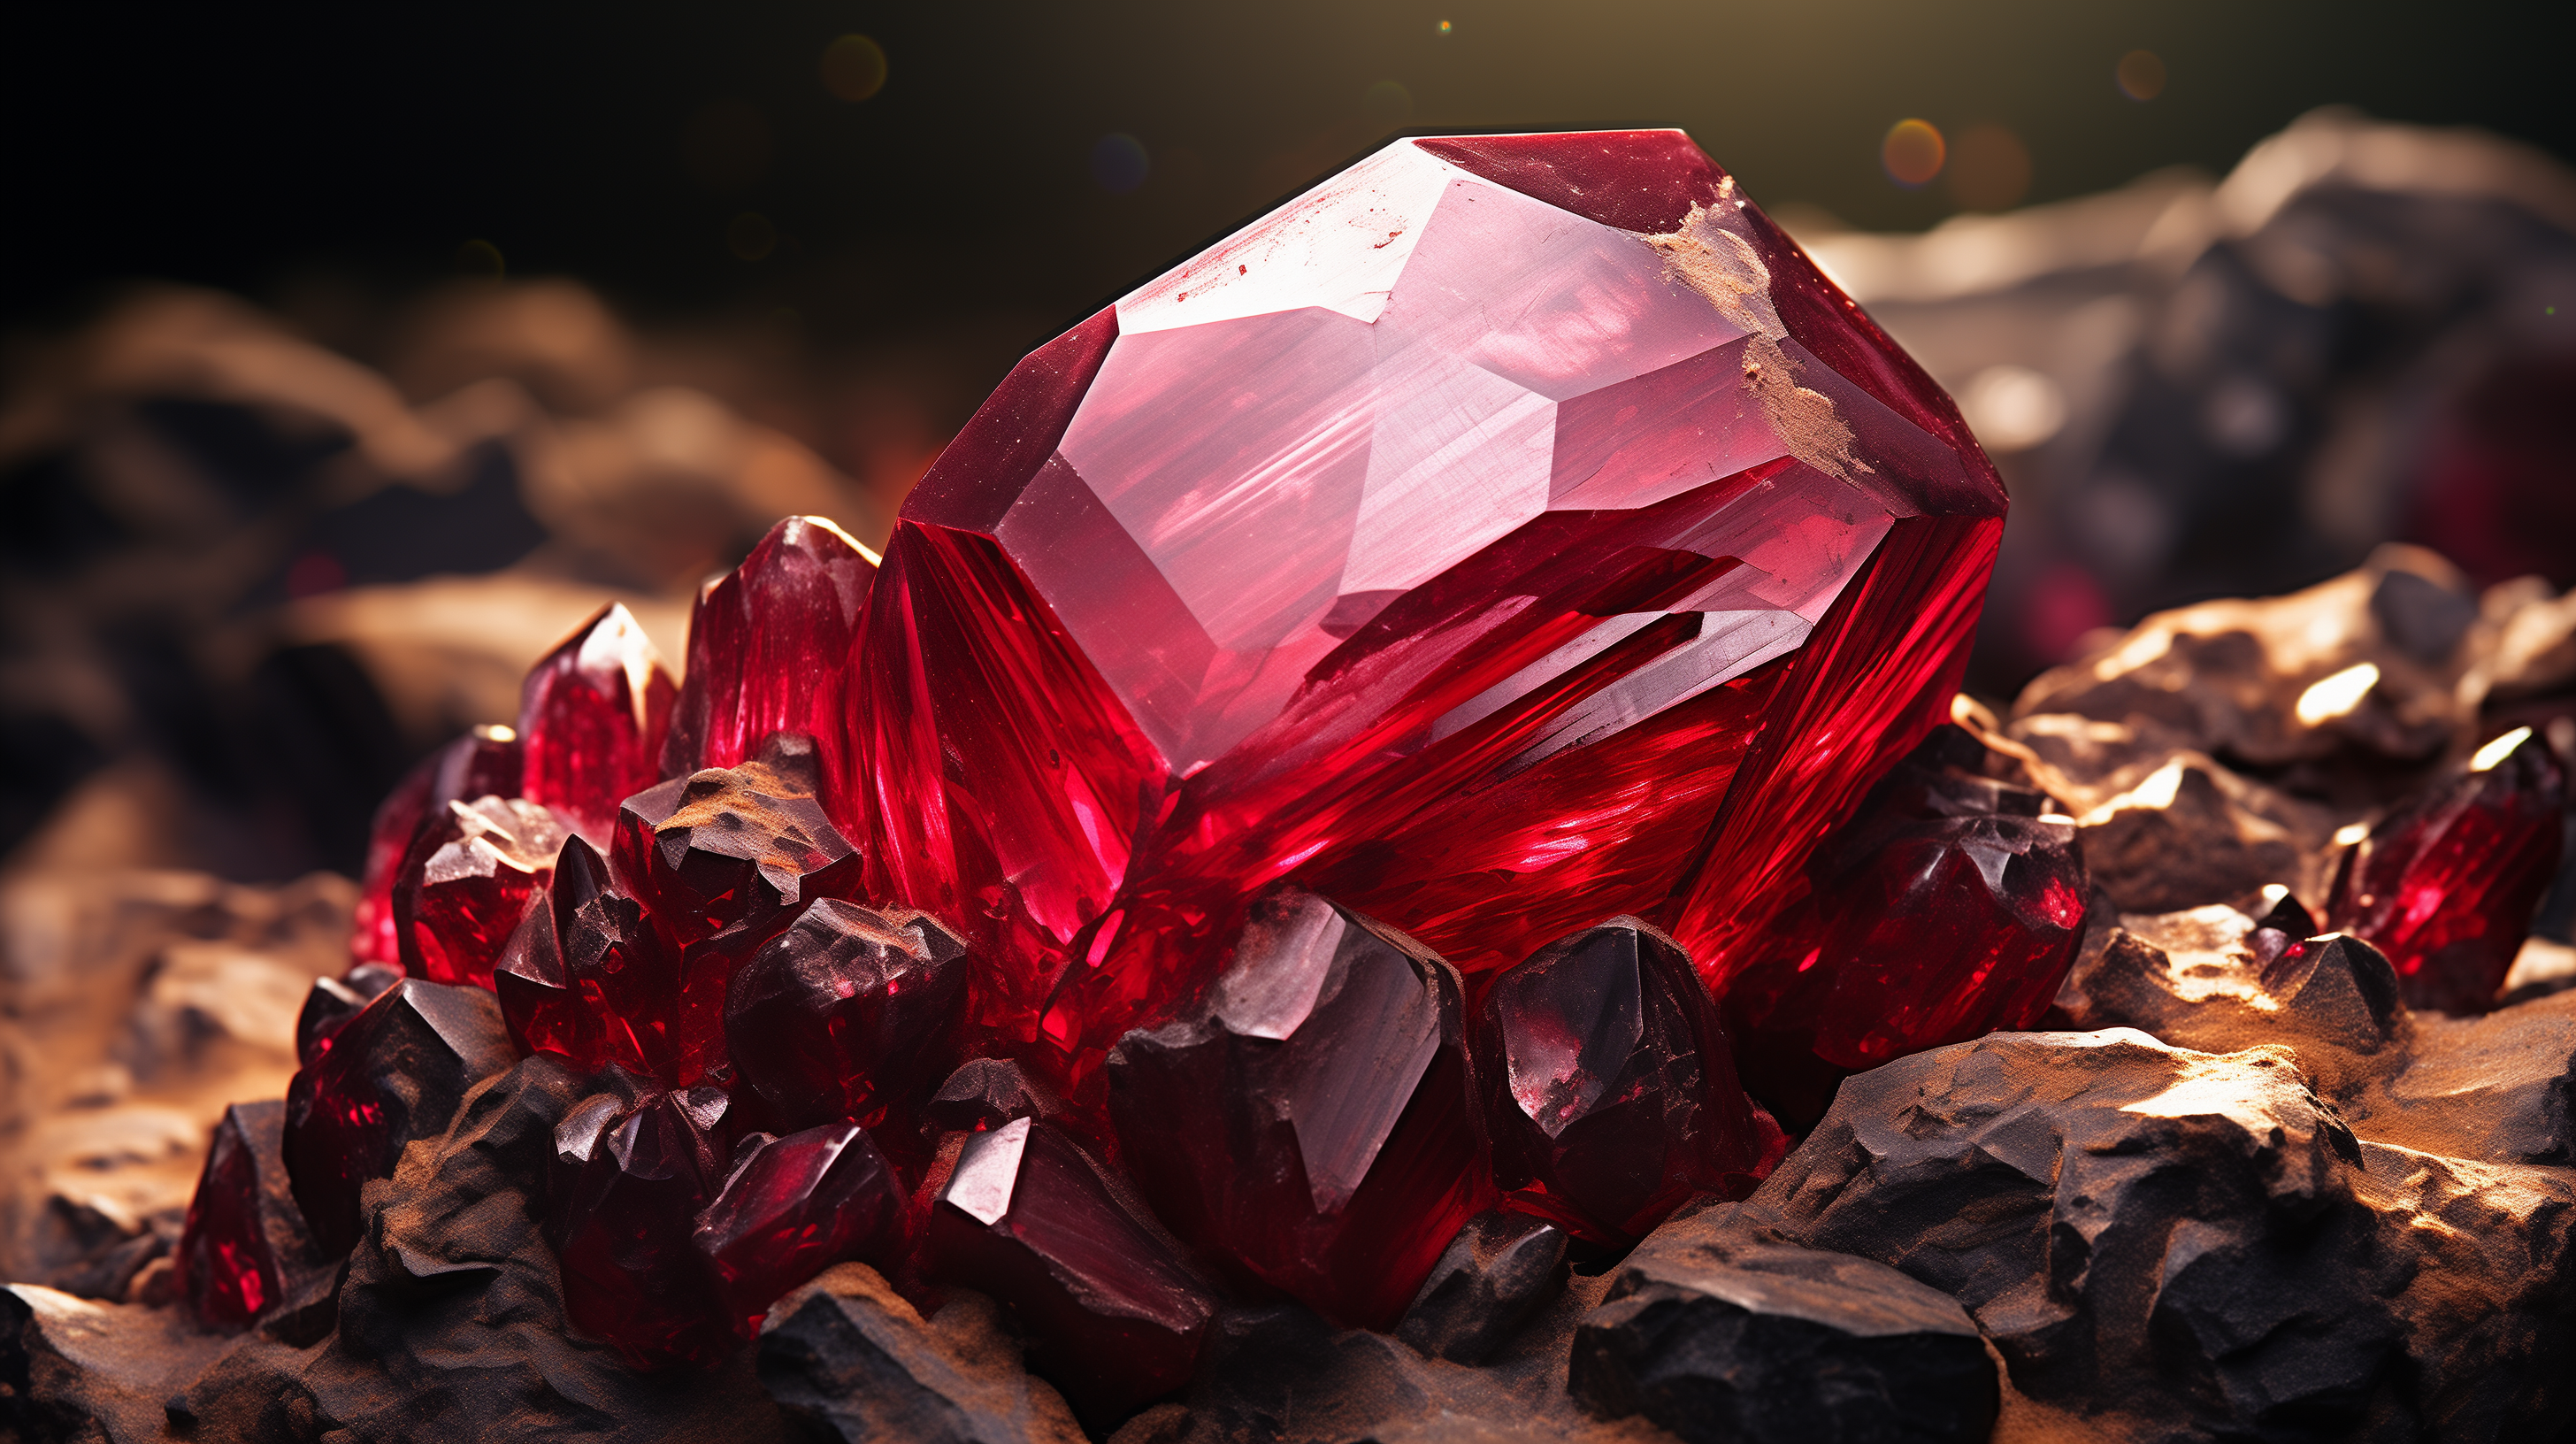 HD wallpaper of a radiant red ruby gemstone amidst smaller crystals, perfect for desktop background